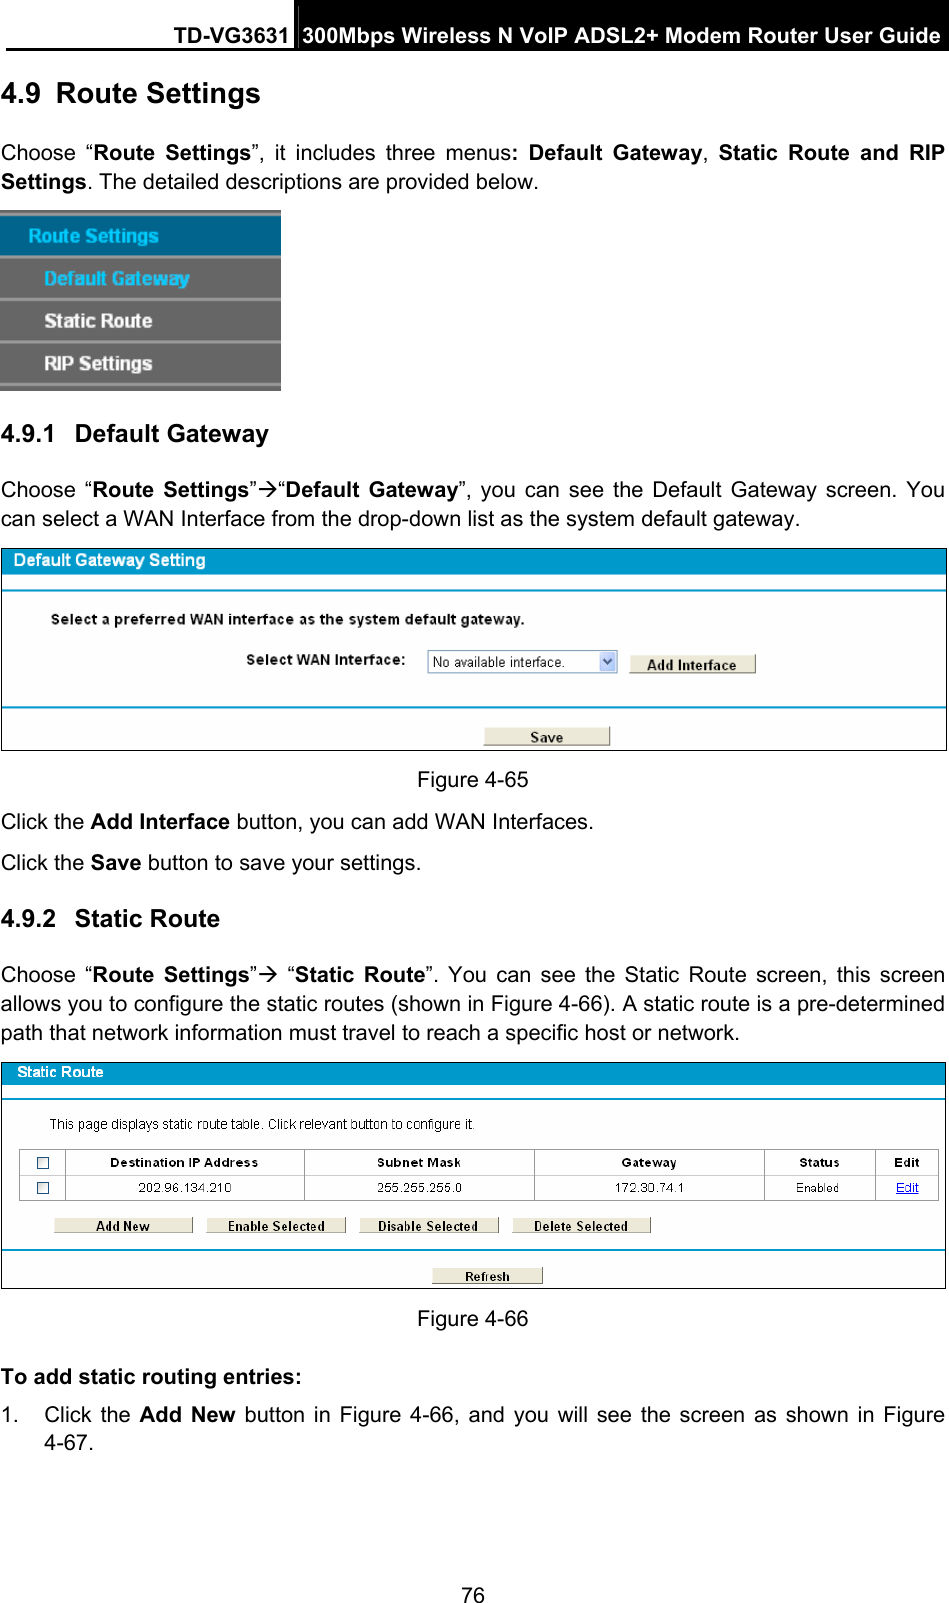 TD-VG3631 300Mbps Wireless N VoIP ADSL2+ Modem Router User Guide 76 4.9  Route Settings Choose “Route Settings”, it includes three menus: Default Gateway,  Static Route and RIP Settings. The detailed descriptions are provided below.  4.9.1  Default Gateway Choose “Route Settings”“Default Gateway”, you can see the Default Gateway screen. You can select a WAN Interface from the drop-down list as the system default gateway.    Figure 4-65 Click the Add Interface button, you can add WAN Interfaces. Click the Save button to save your settings. 4.9.2  Static Route Choose “Route Settings” “Static Route”. You can see the Static Route screen, this screen allows you to configure the static routes (shown in Figure 4-66). A static route is a pre-determined path that network information must travel to reach a specific host or network.  Figure 4-66 To add static routing entries: 1. Click the Add New button in Figure 4-66, and you will see the screen as shown in Figure 4-67.  